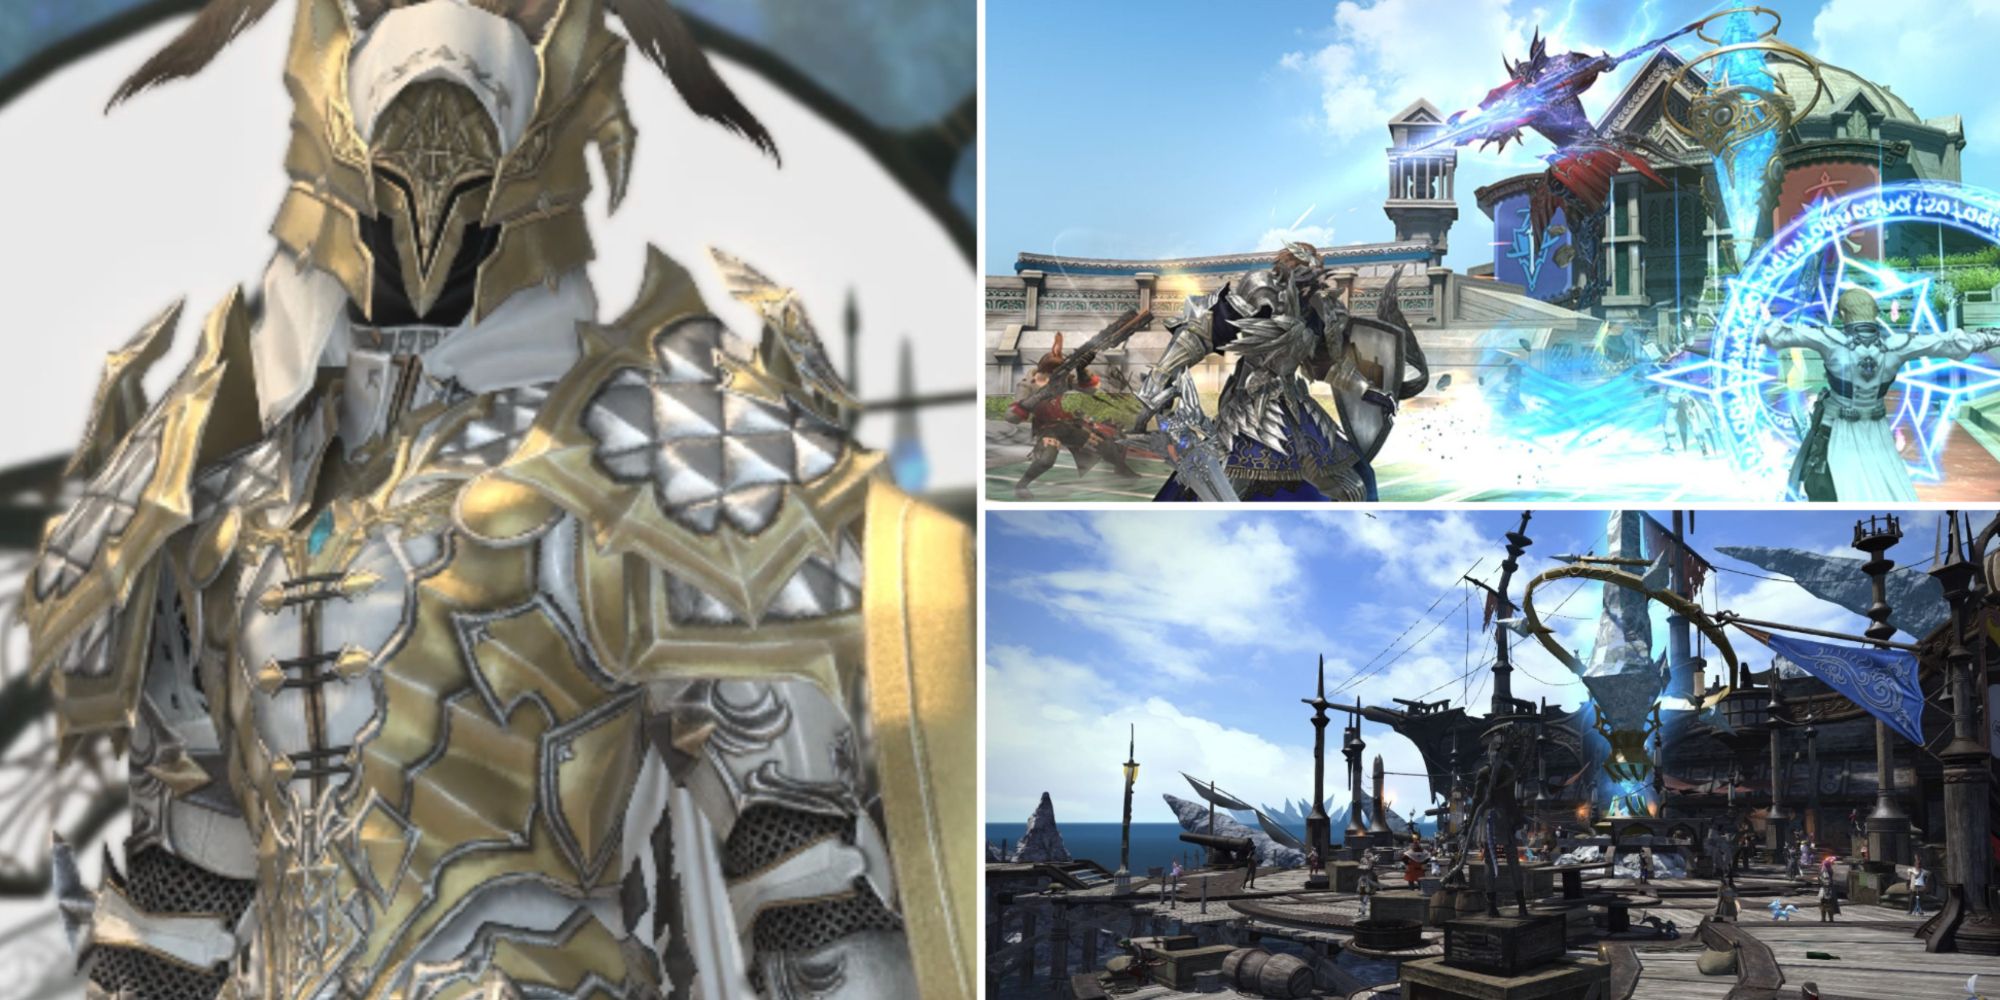 A collage showcasing the False Monarchy Attire (Far Left Box), an on-going match of Crystalline Conflict (Top Right Box), and the Wolves' Pier Den (Lower Right Box), in Final Fantasy 14.